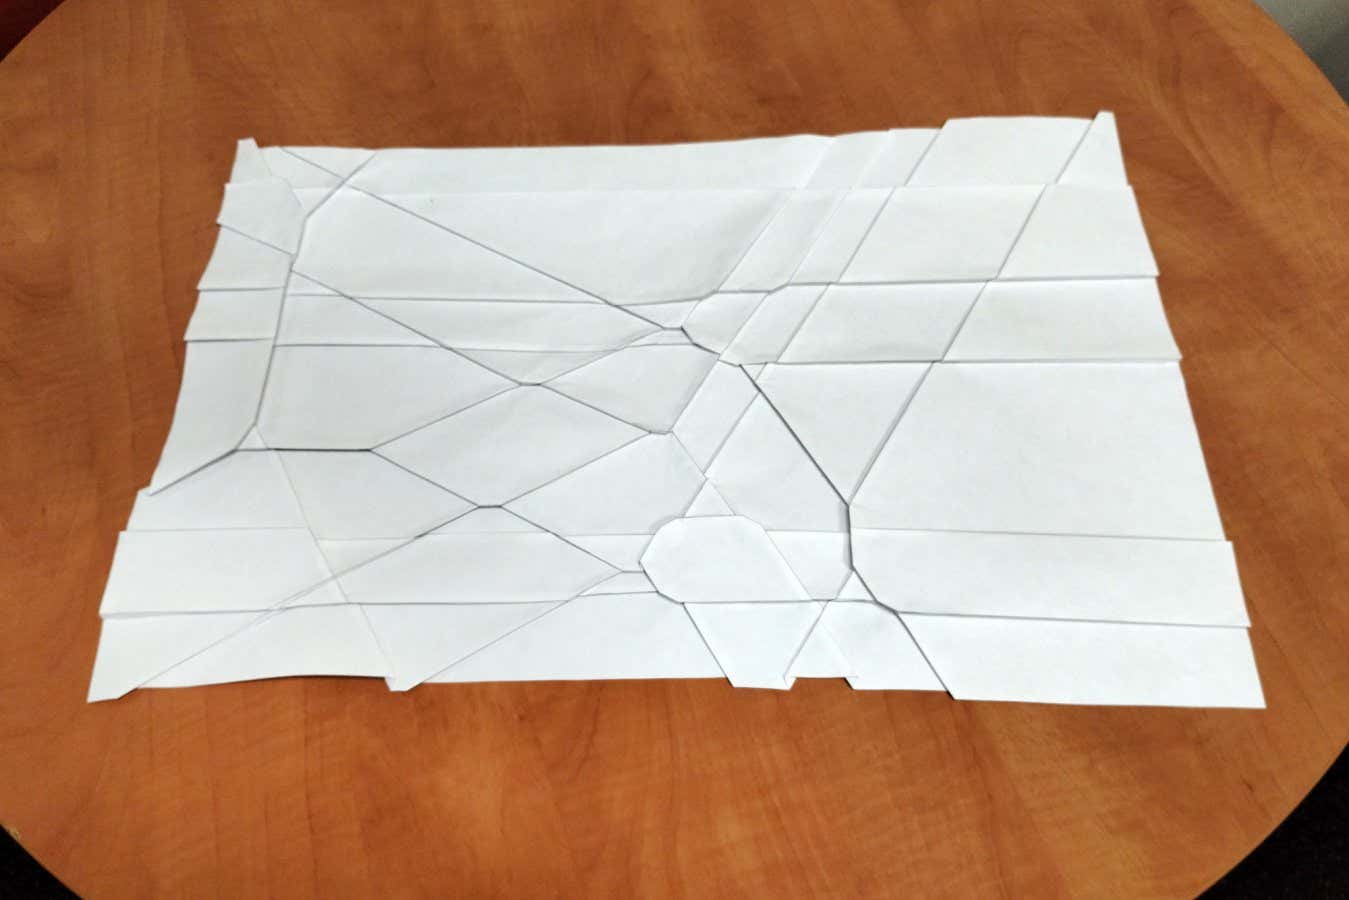 Origami computer uses folded paper for calculations